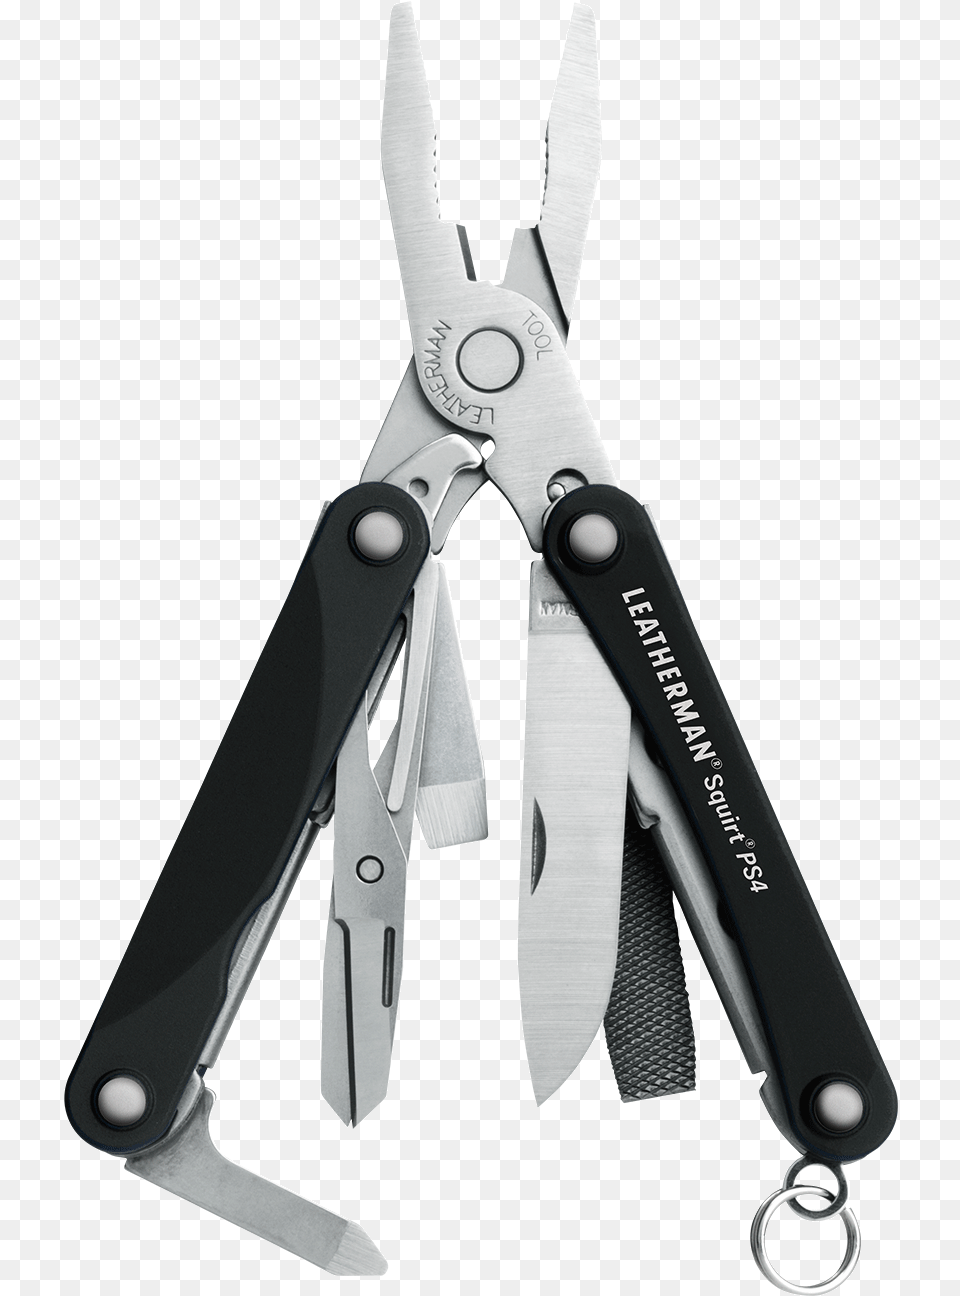 Squirt Ps4 Leatherman Squirt Ps4 Multitool Black, Device, Blade, Dagger, Knife Png Image